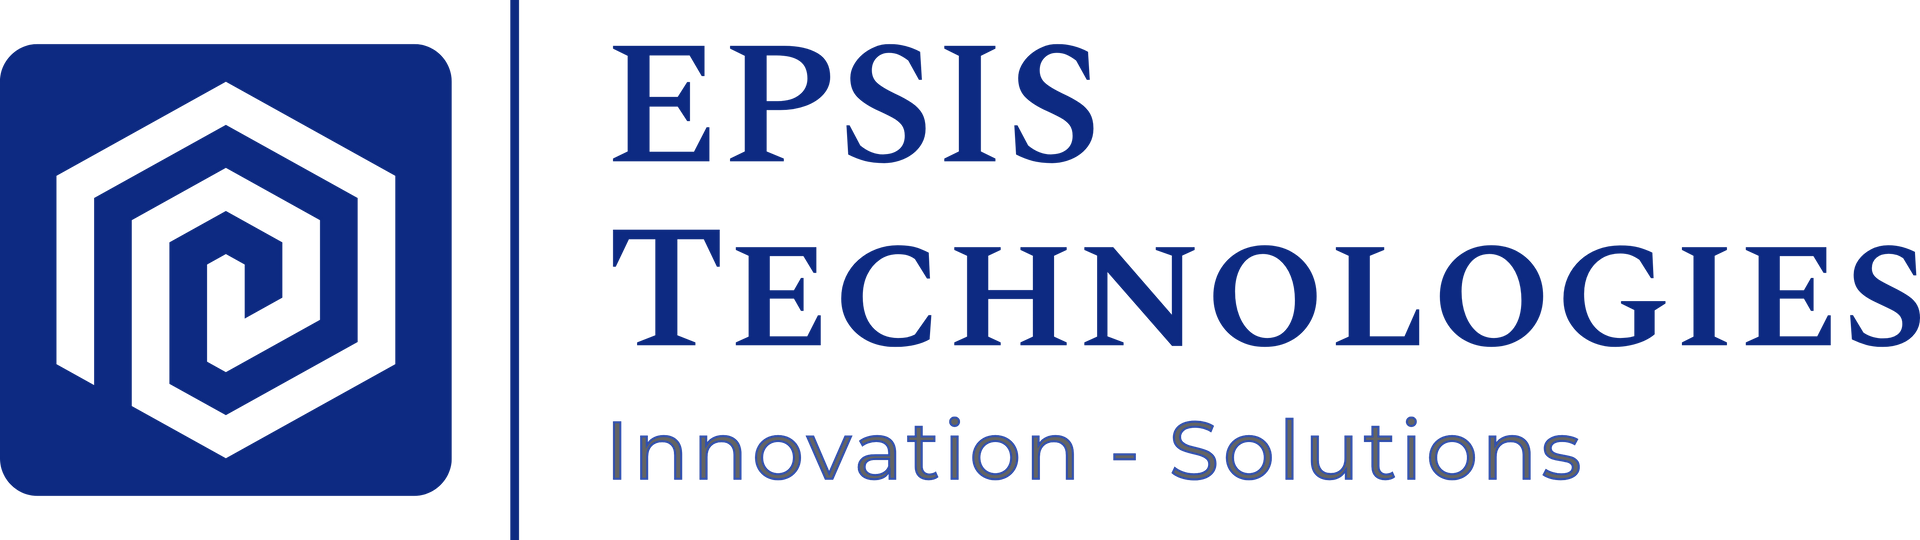 A blue and white logo for epsis technologies innovation solutions